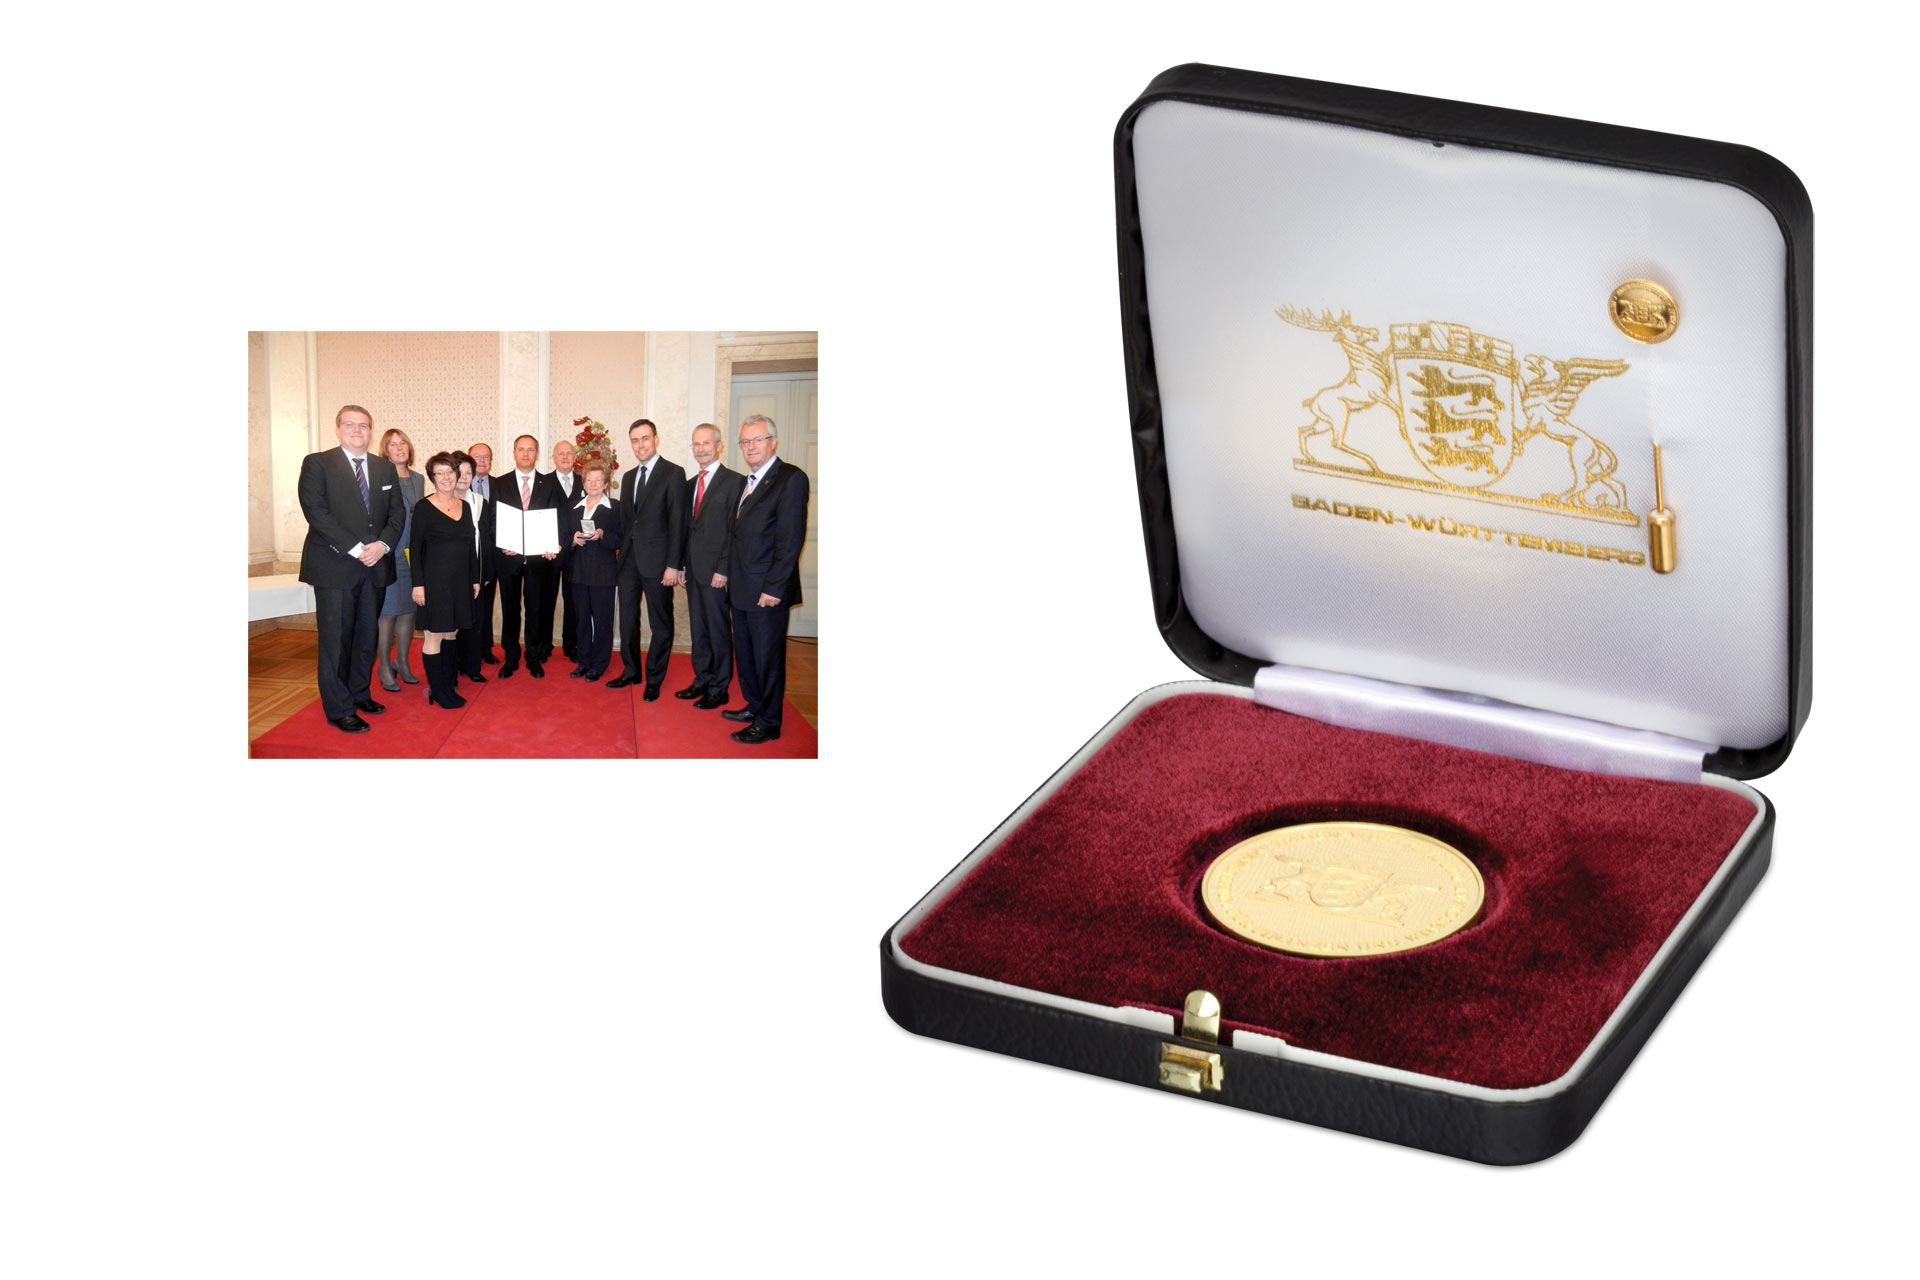 Recognition to Edelstahl Rosswag through the Industry Medal of Baden-Württemberg State